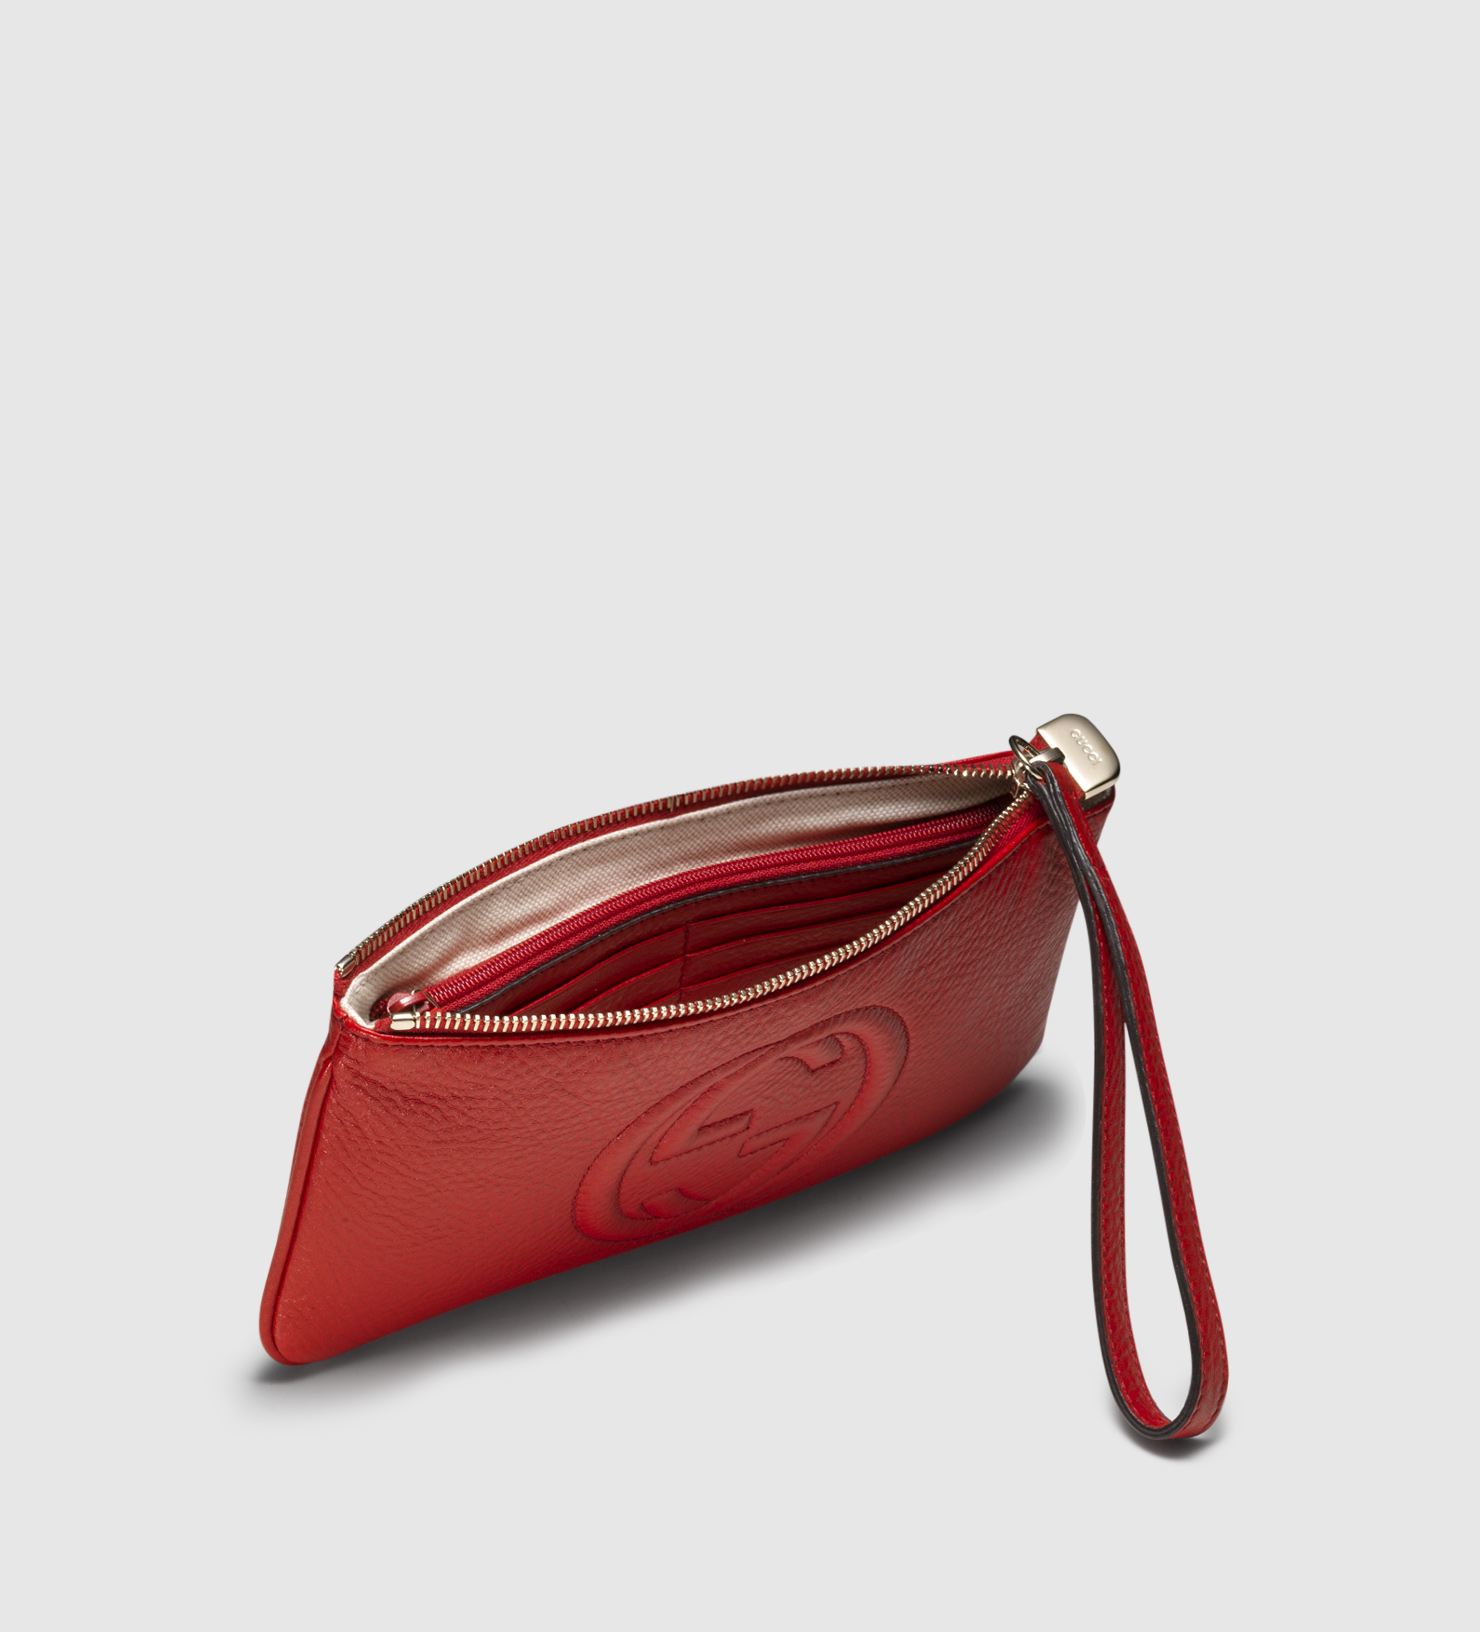 Lyst - Gucci Soho Leather Wristlet in Red for Men